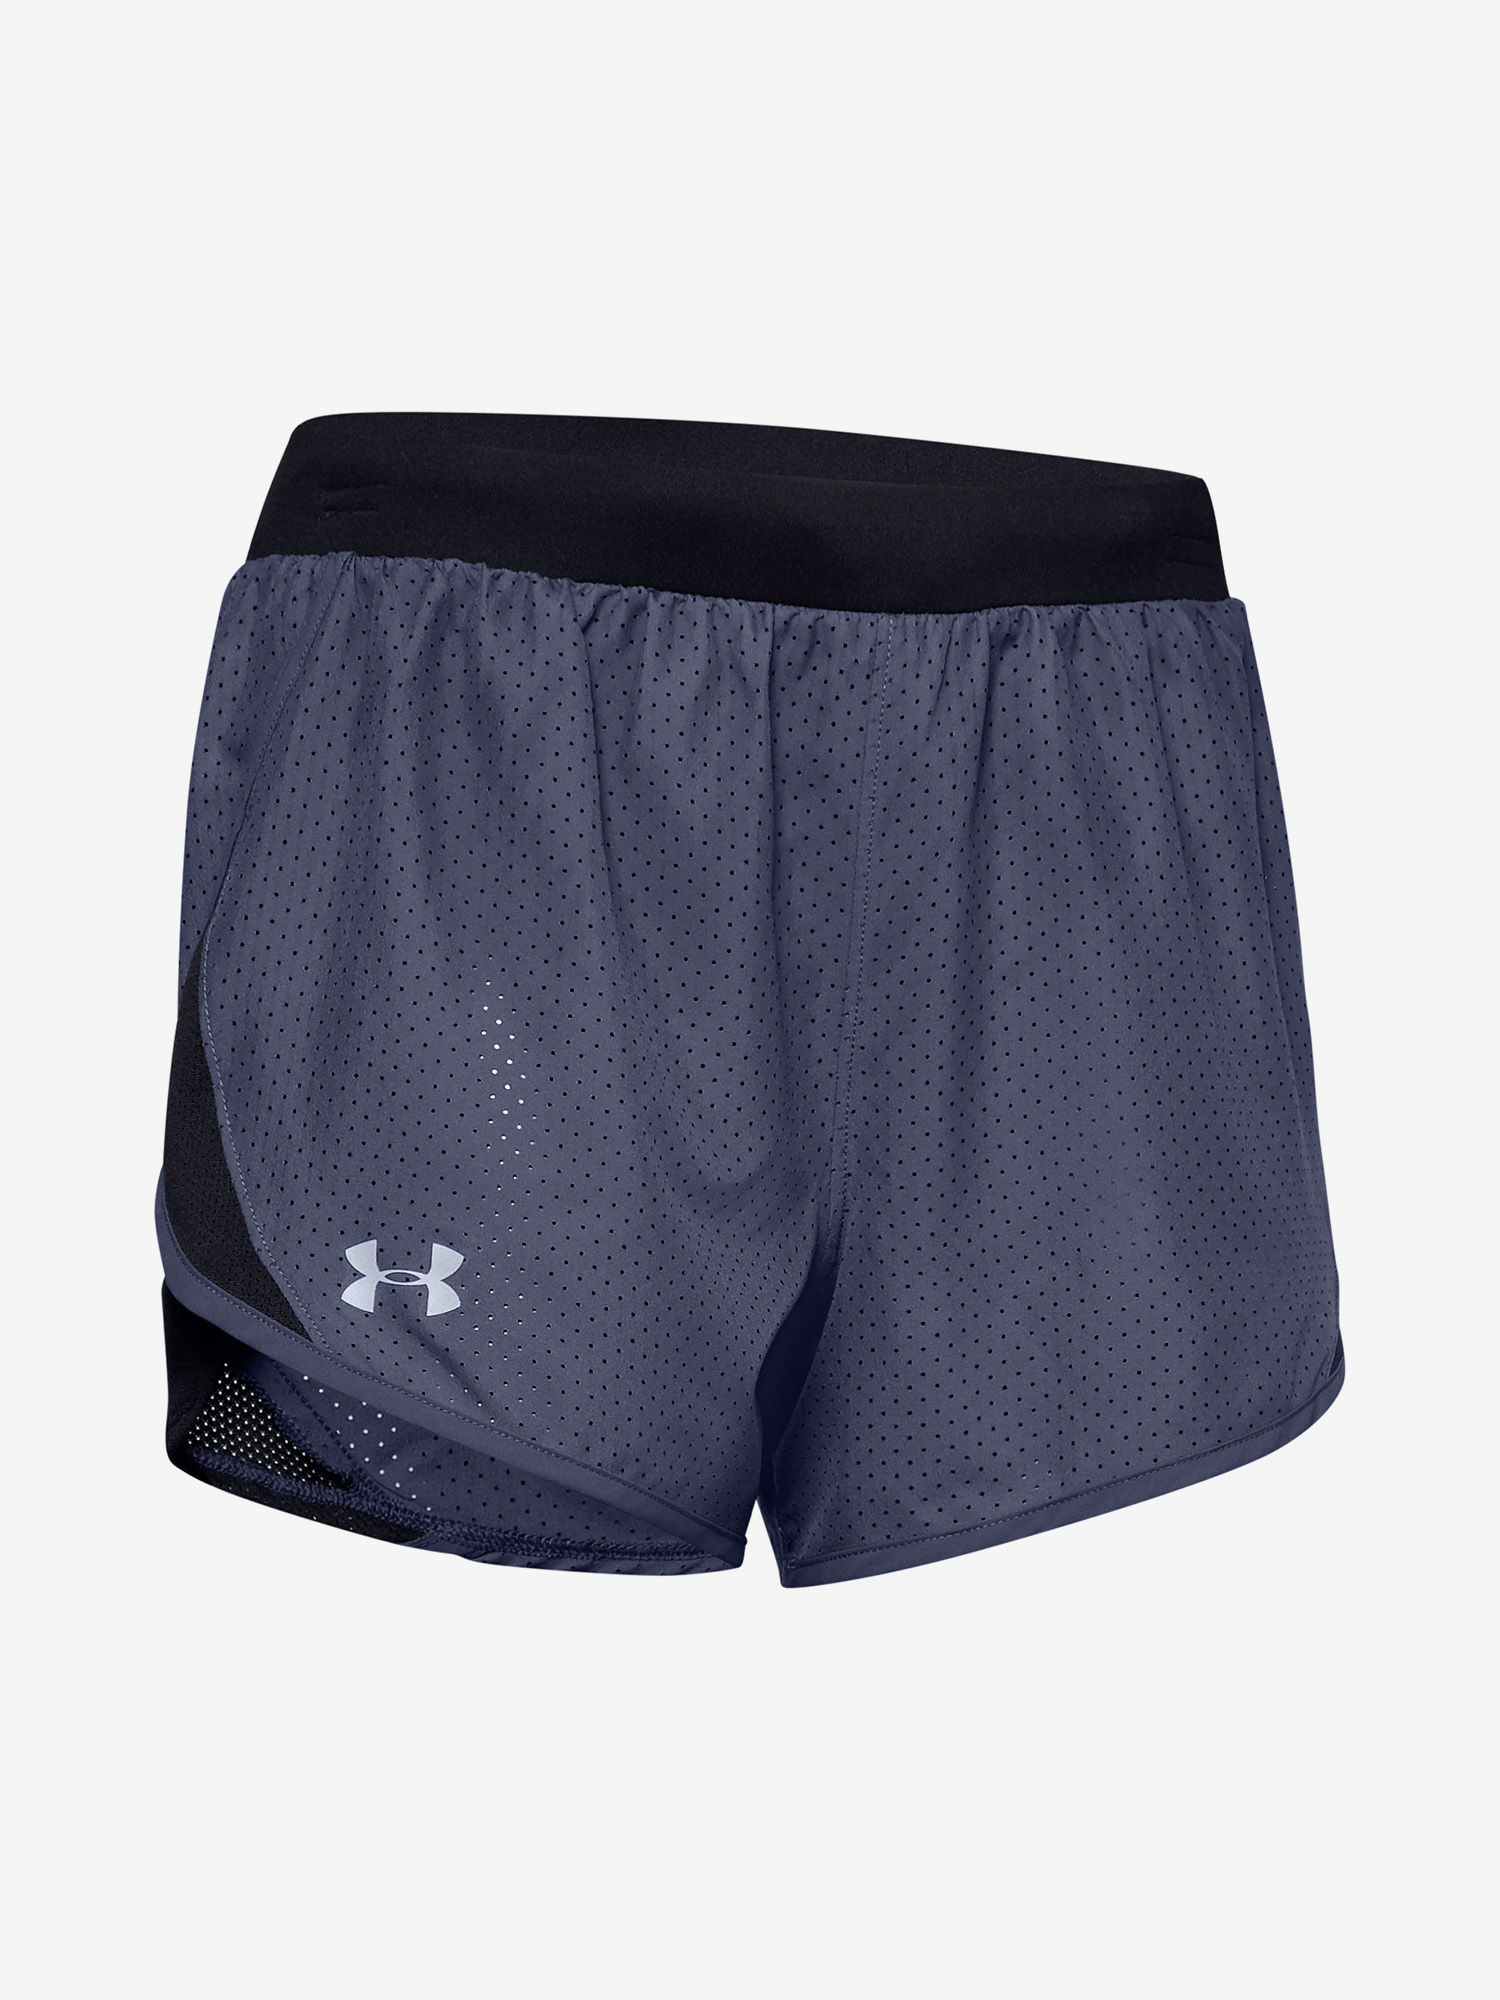 Women's Under Armour Fly By 2.0 Floral Running Shorts